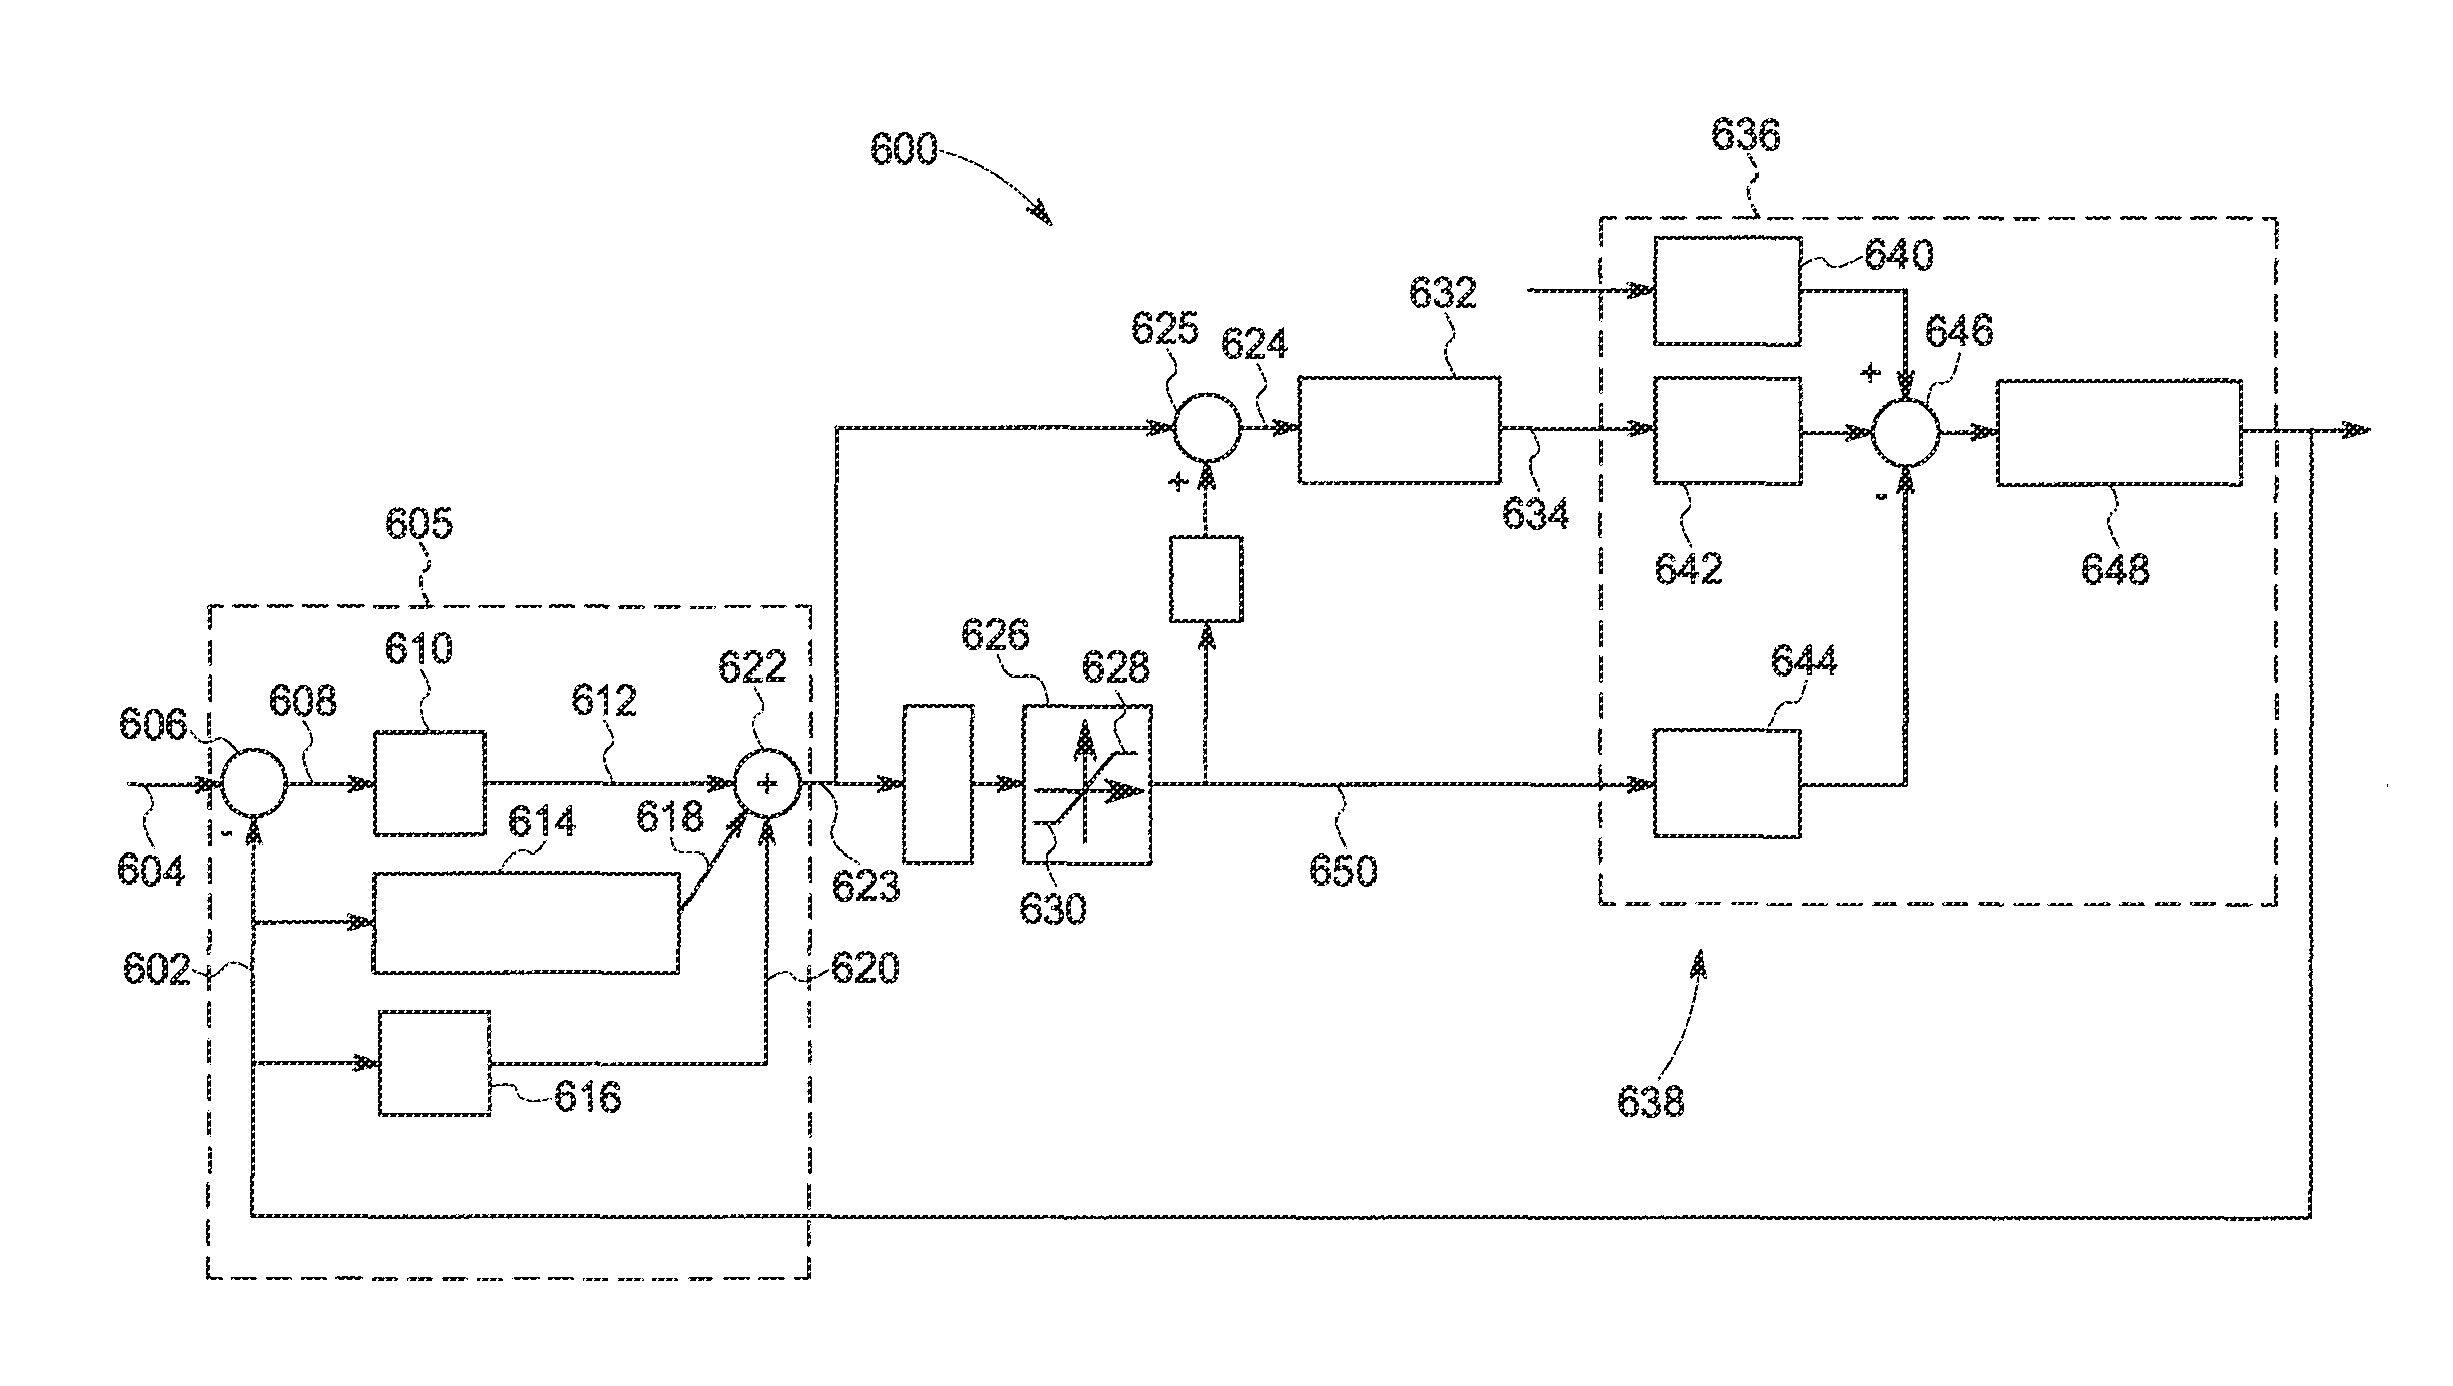 Method and system for managing loads on a wind turbine